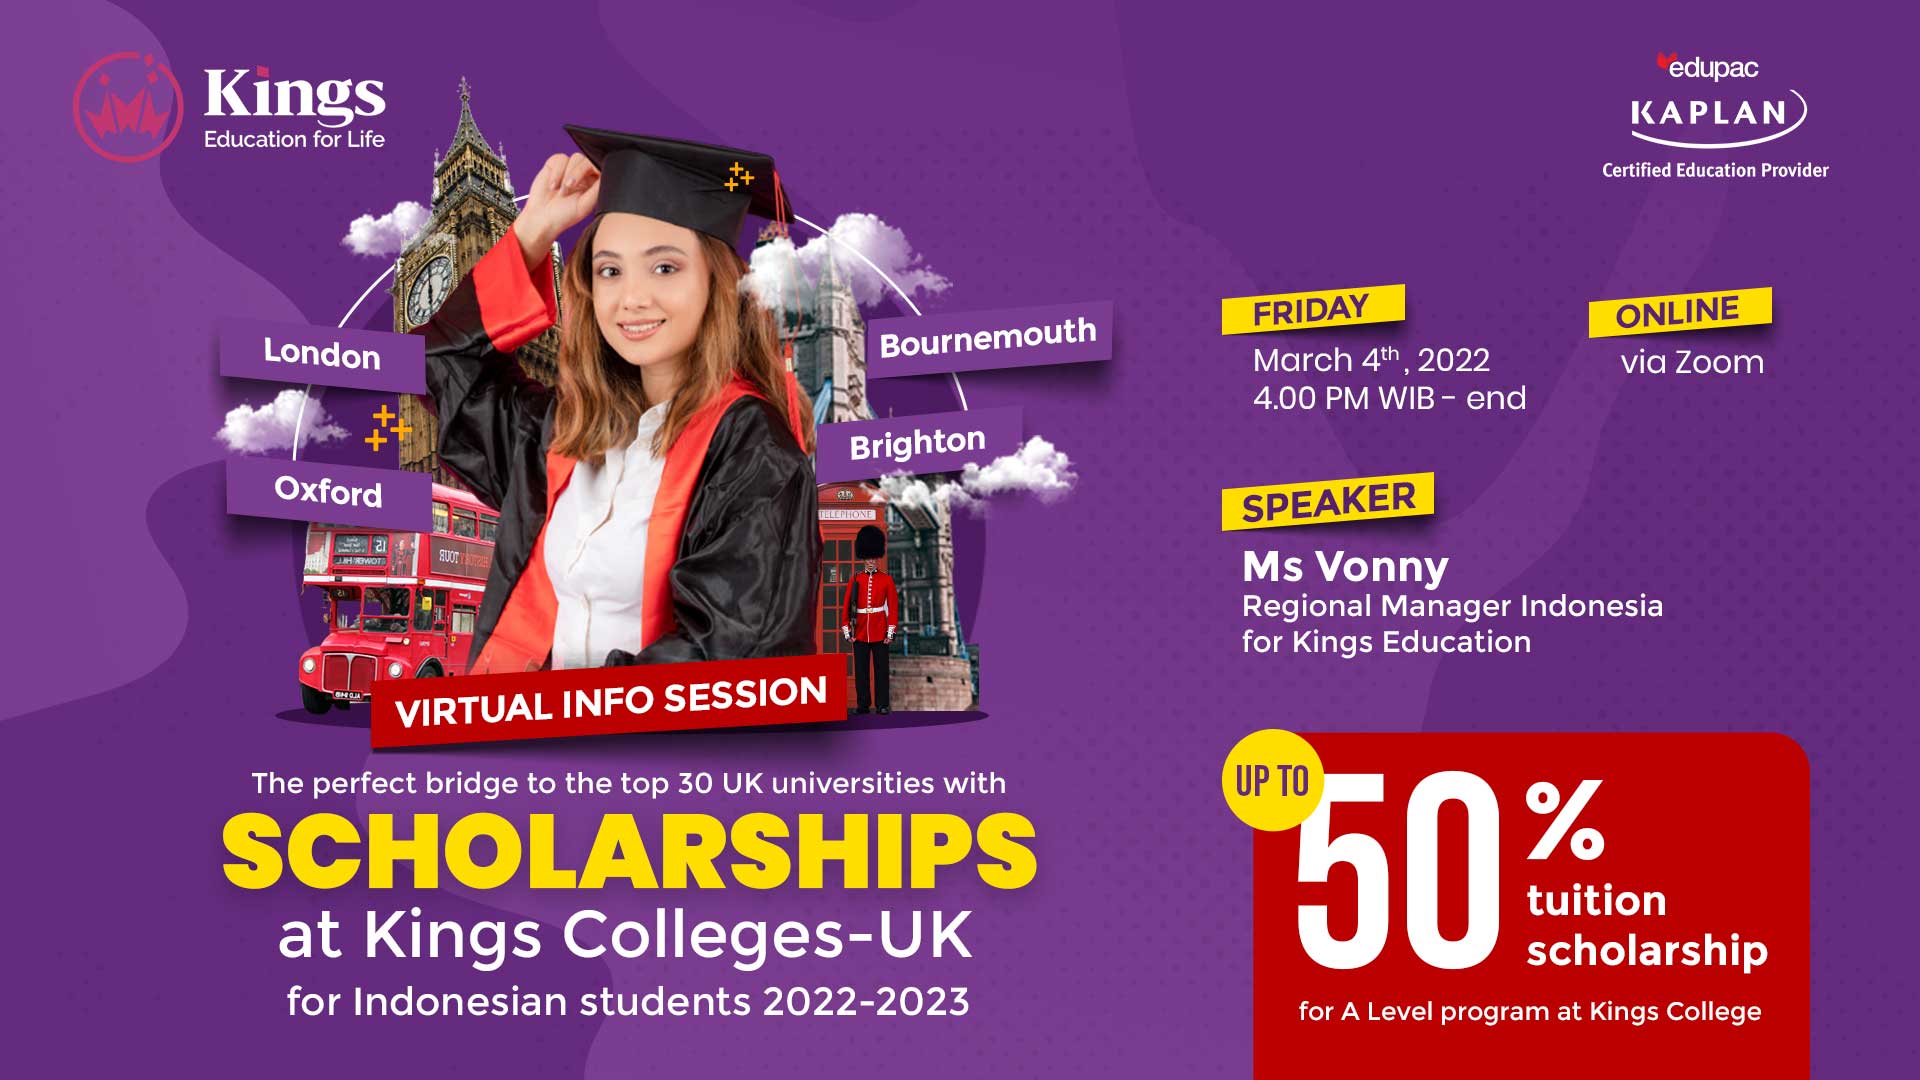 Webinar: Virtual Info Session "Scholarships at Kings Colleges-UK for Indonesian students 2022-2023" 